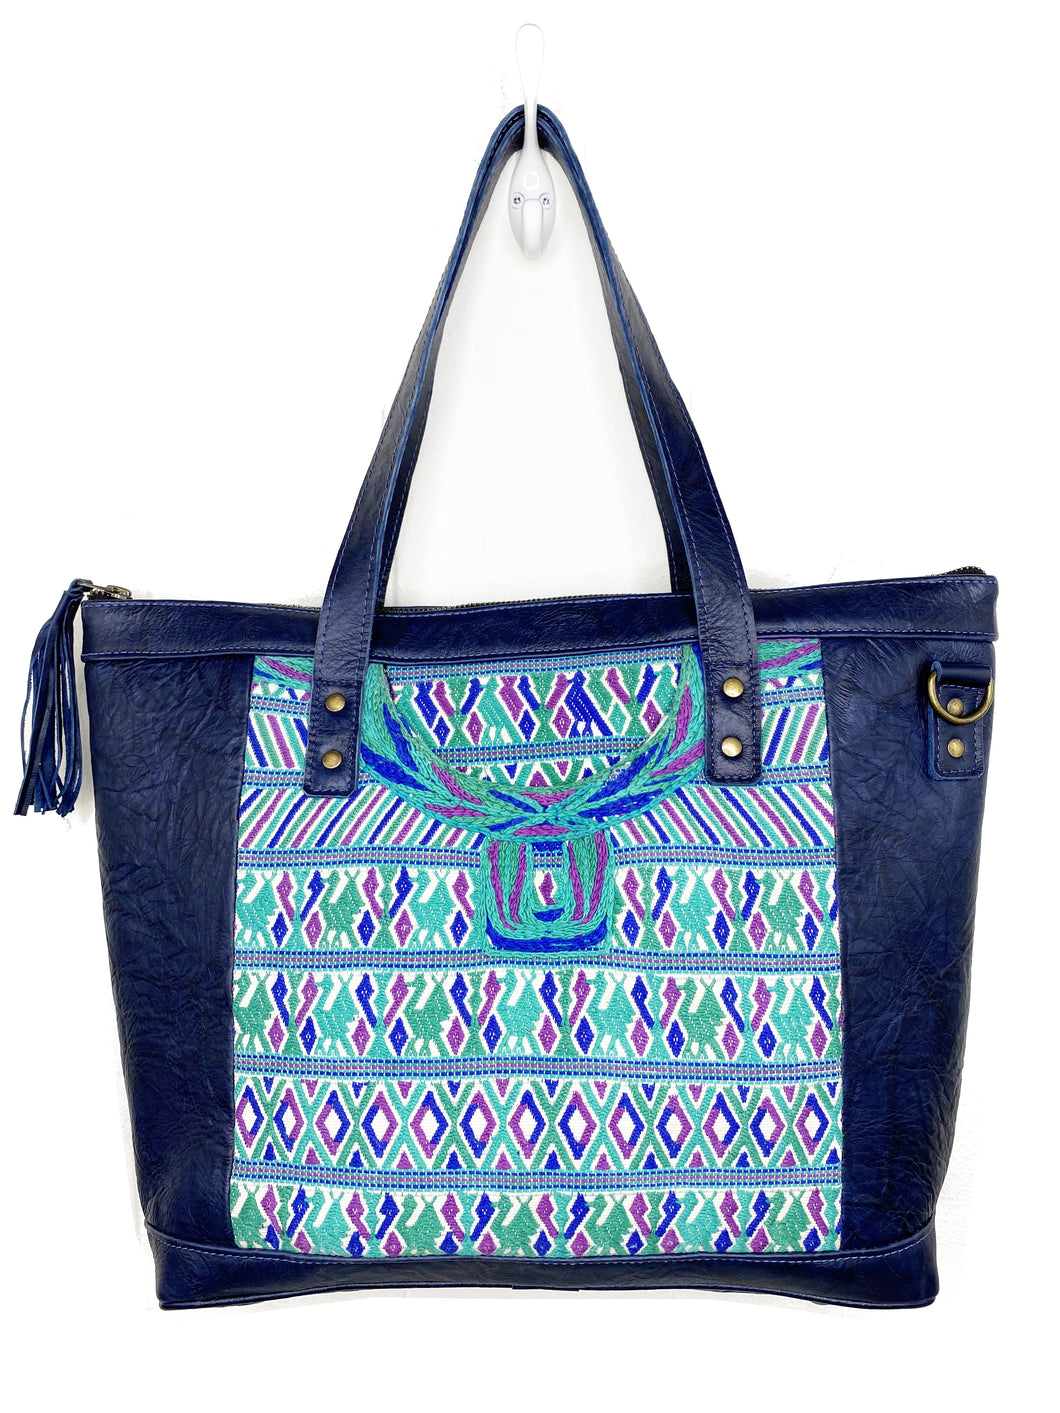 MoonLake Designs Olivia Large Tote Bag in textured navy blue handcrafted leather with mesmerizing handwoven huipil design in shades of blue, teal, and purple and leather tassel zipper closure